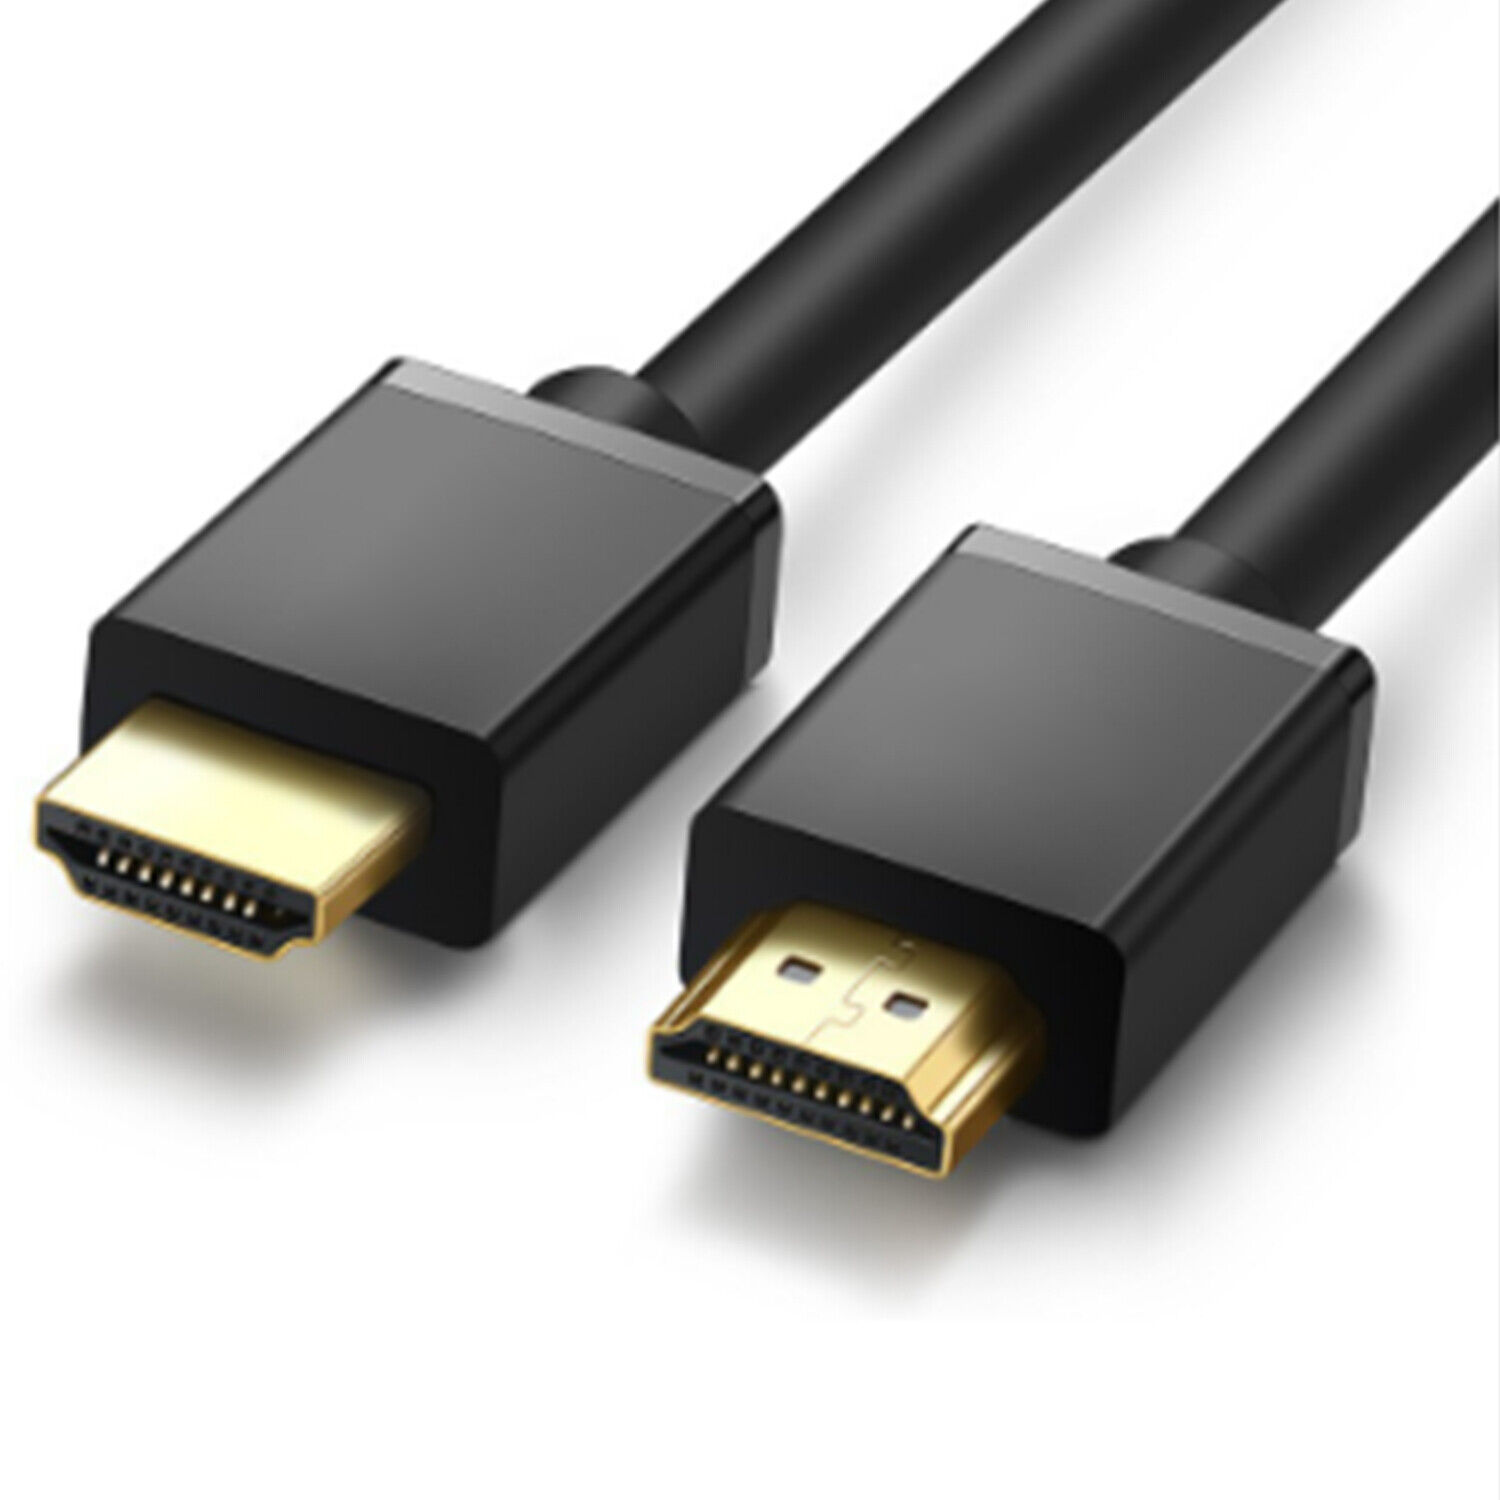 UCable - Standard HDMI to Standard HDMI Cable for PC Monitor 4K 60Hz HDMI 2.0